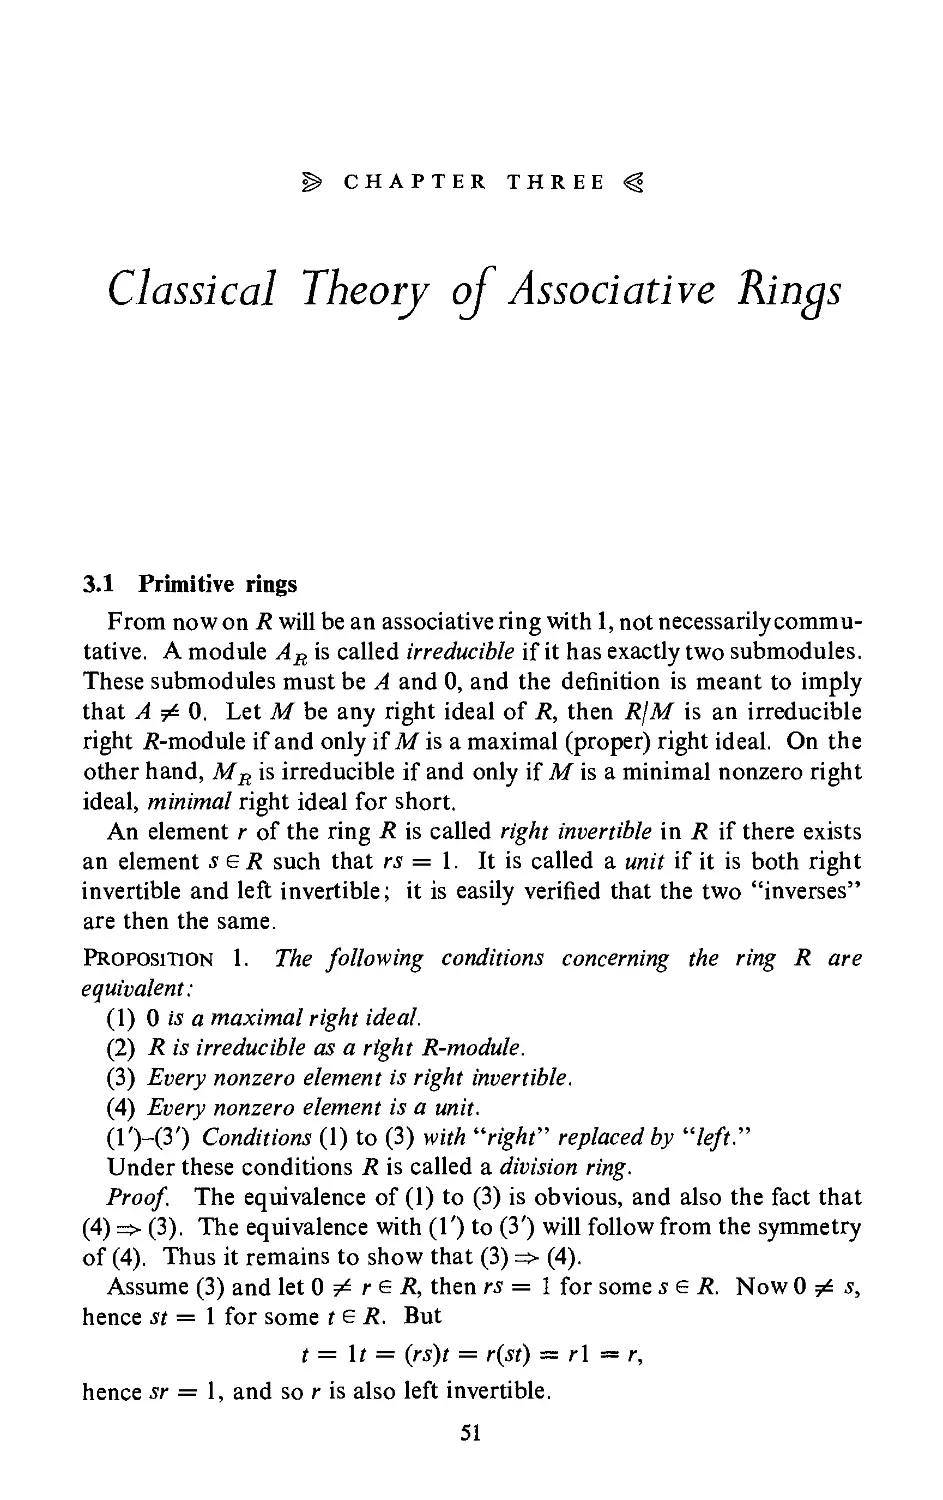 3. Classical Theory of Associative Rings